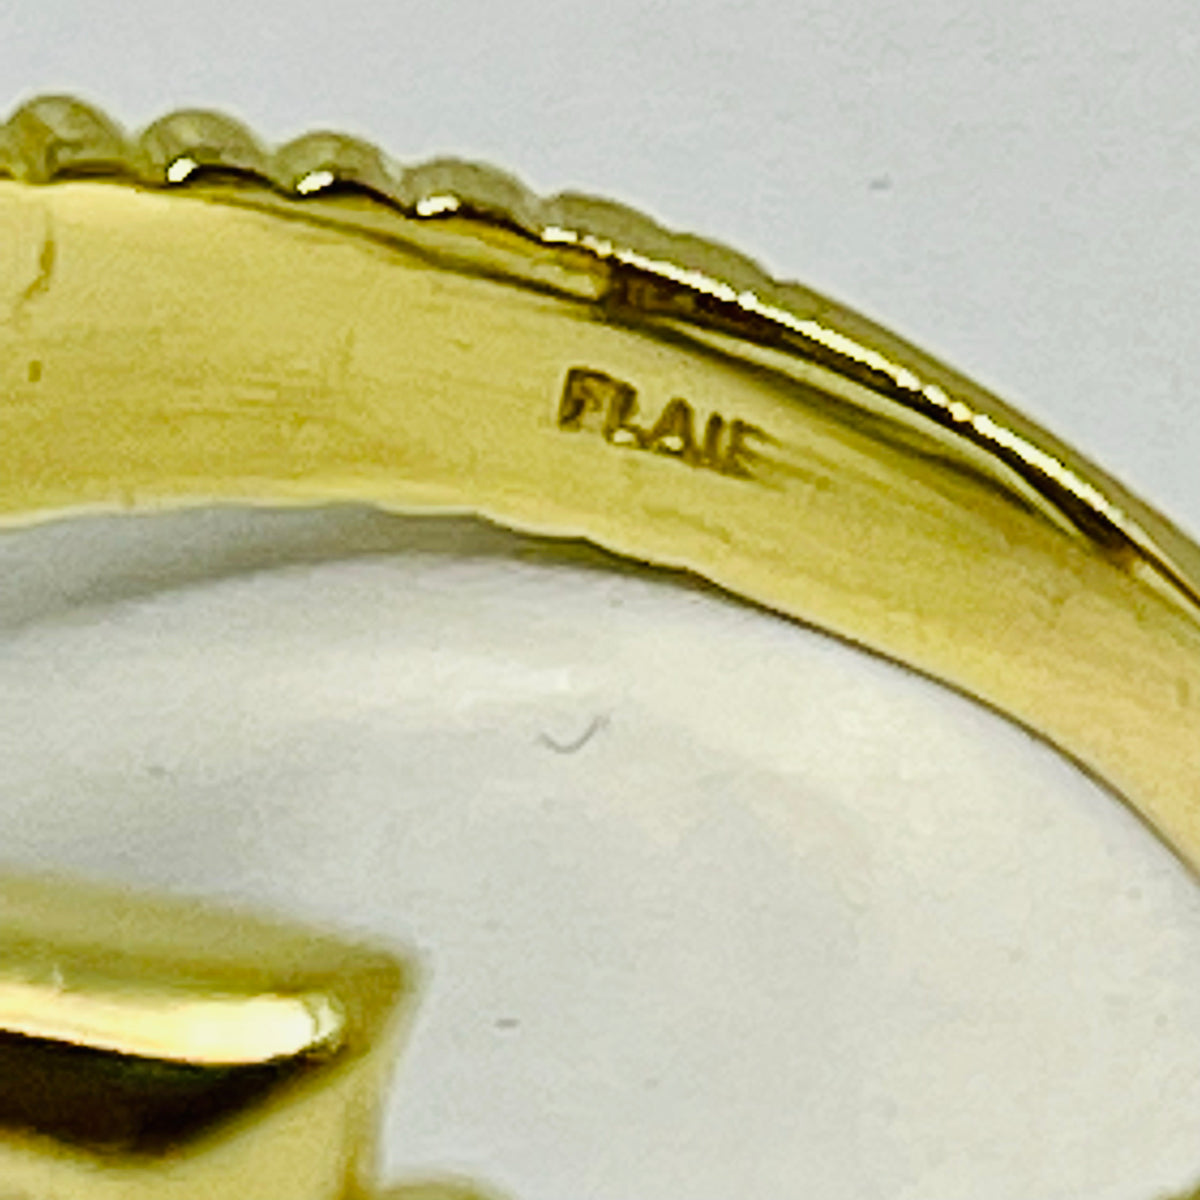 18K White and Yellow Gold Ring with Diamonds